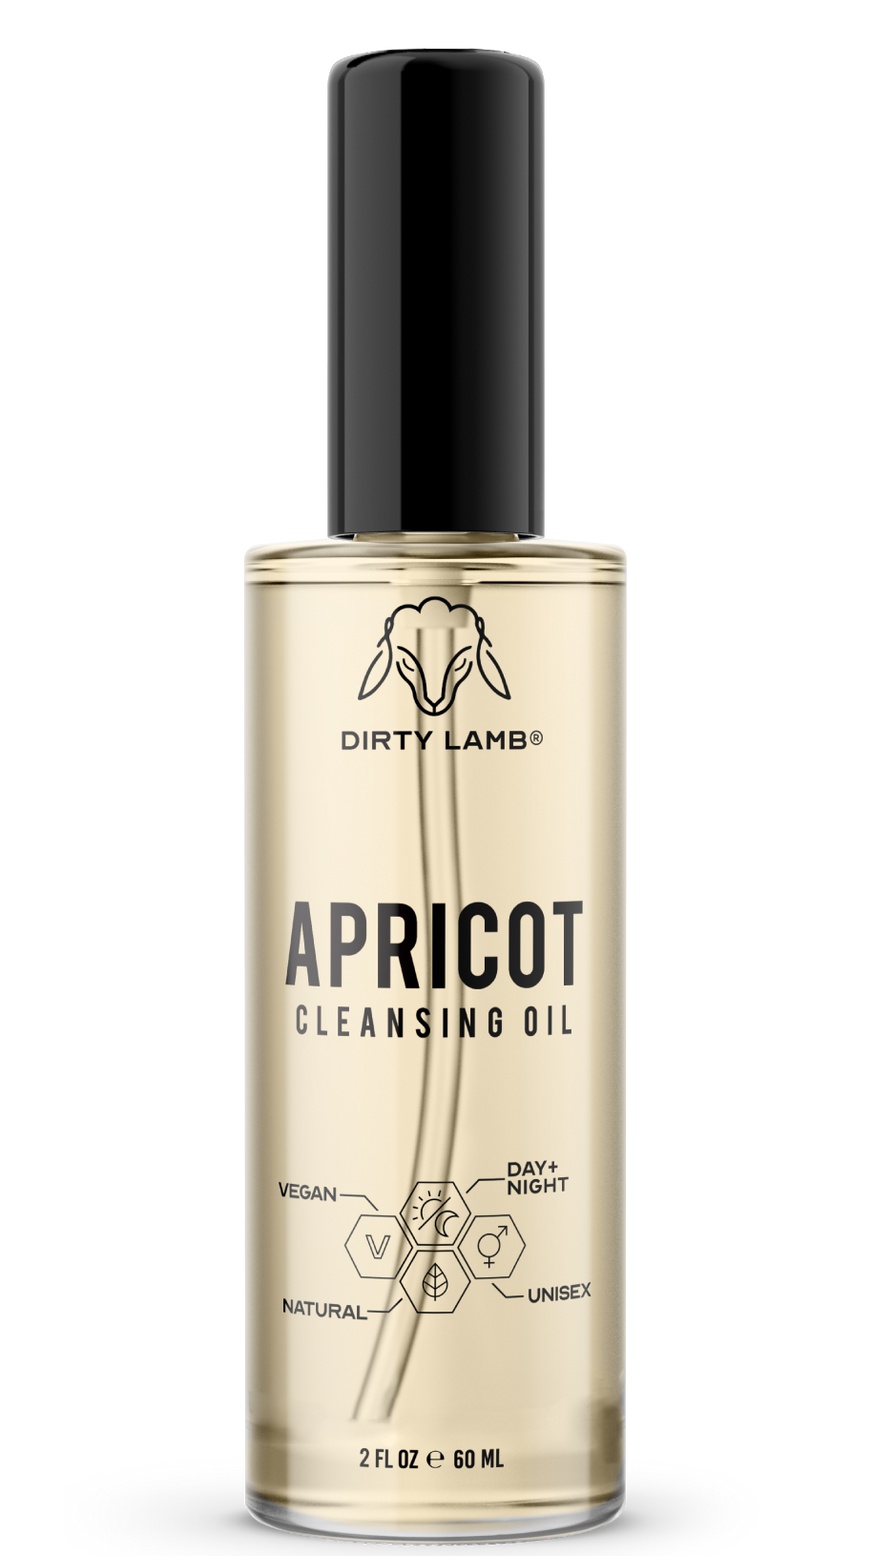 Dirty Lamb Apricot Cleansing Oil